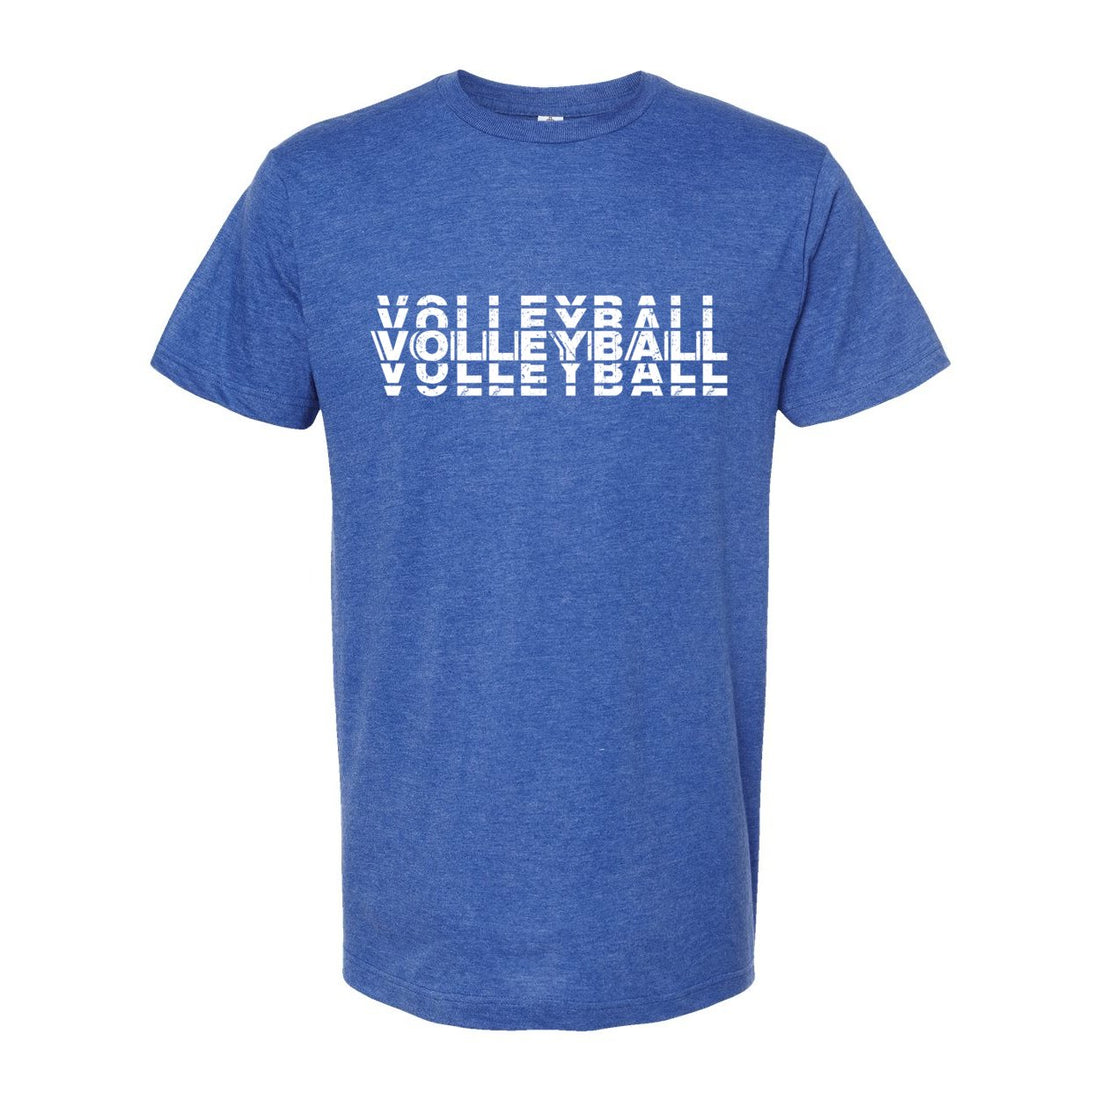 Volleyball Repeat Unisex Fine Jersey T-Shirt - T-Shirts - Positively Sassy - Volleyball Repeat Unisex Fine Jersey T-Shirt